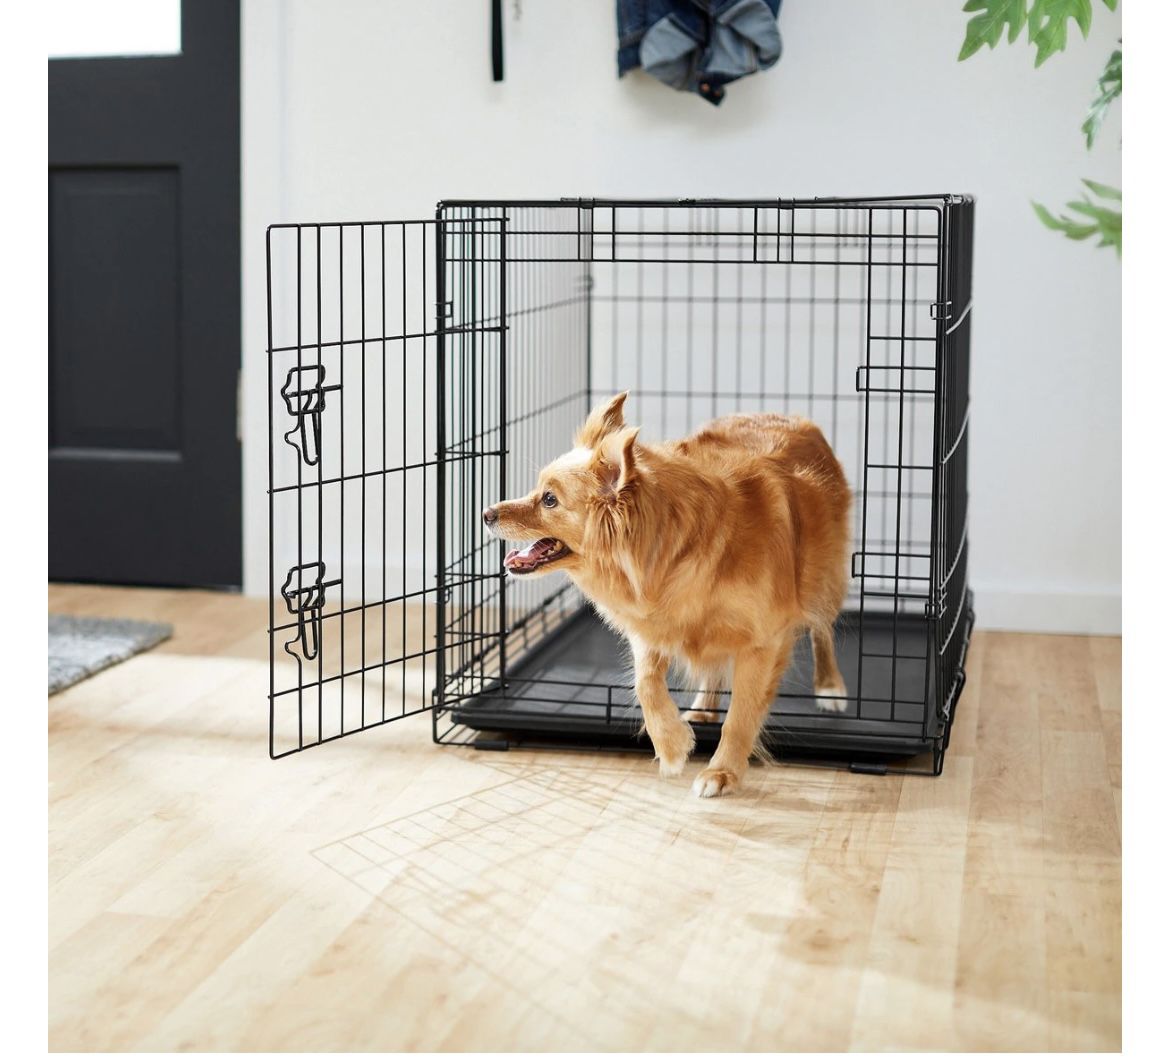 M/L Dog Kennel/Crate